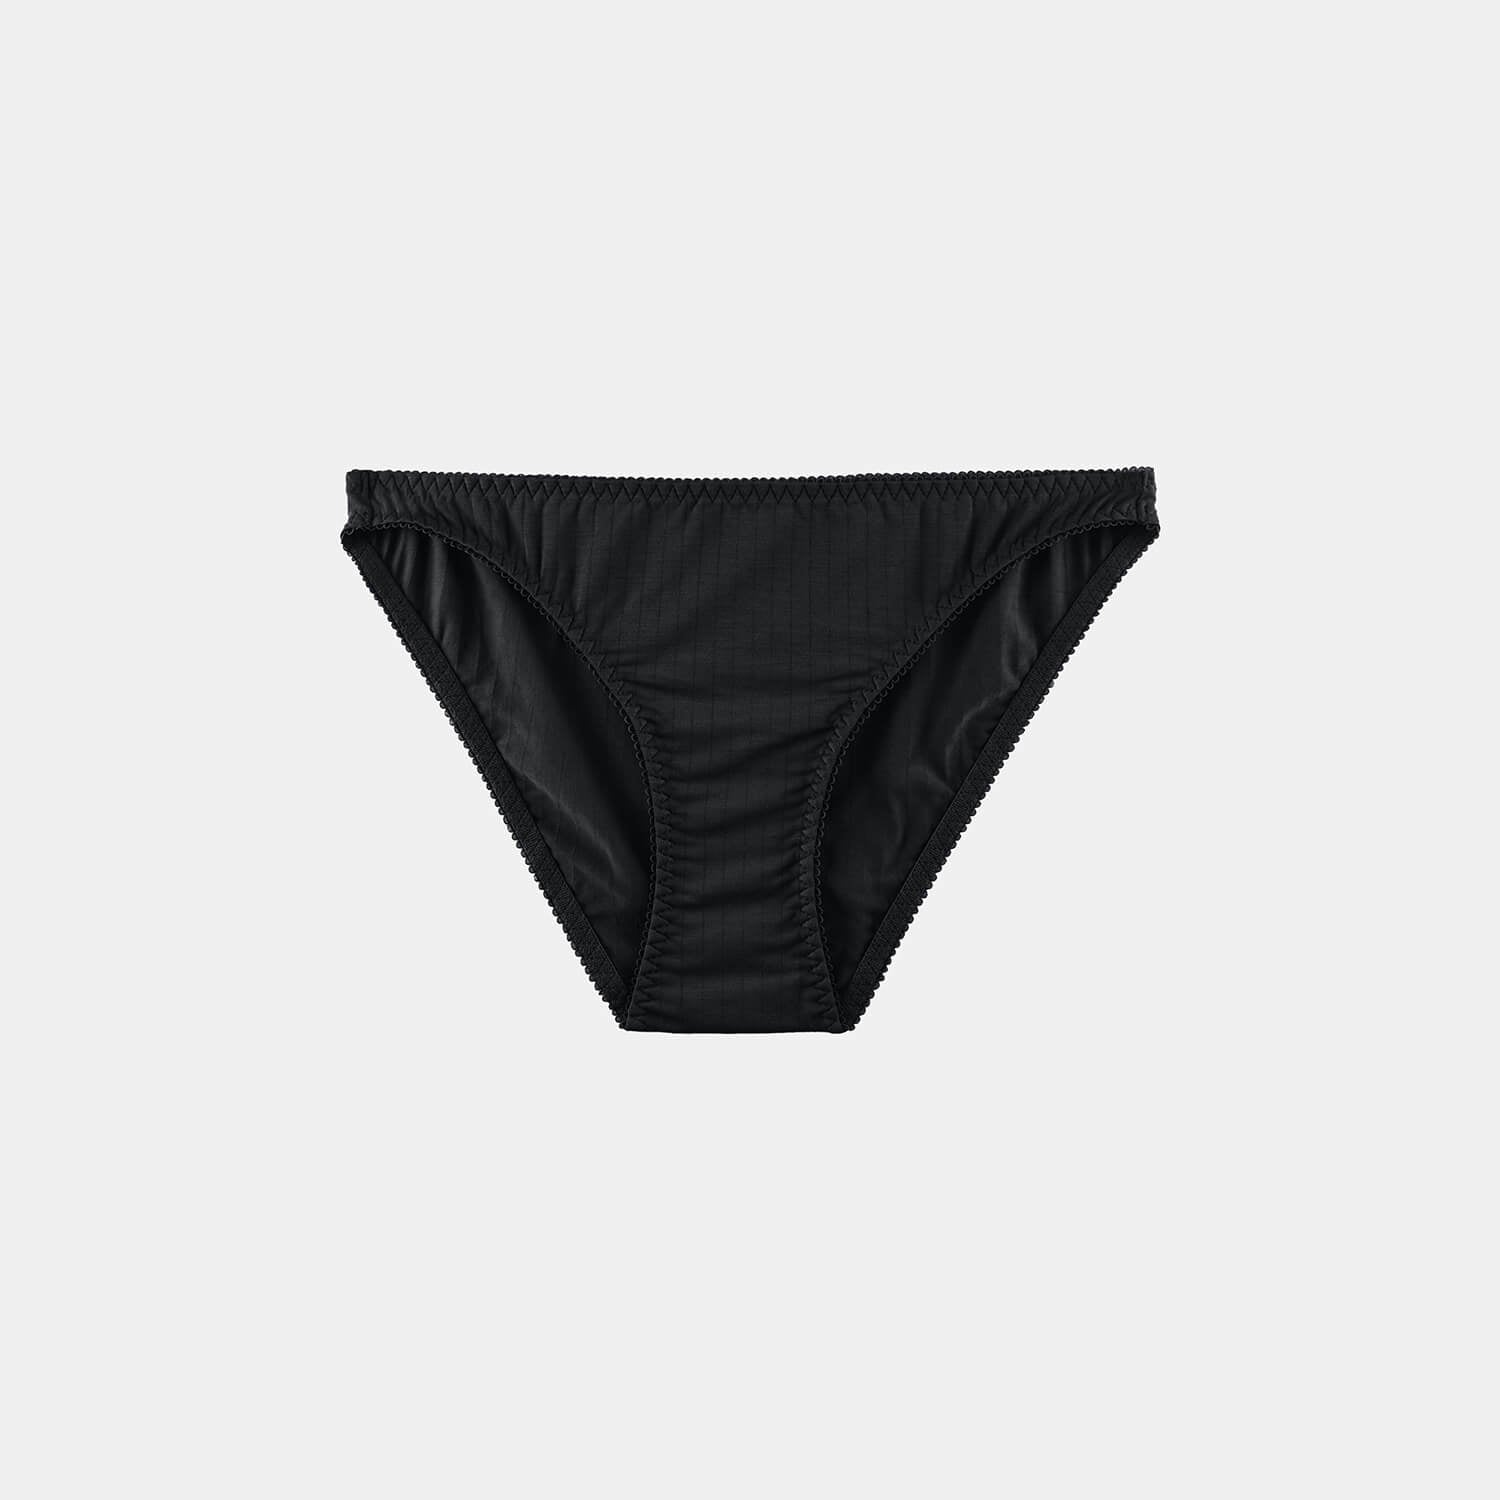 Knickers (color - Black)